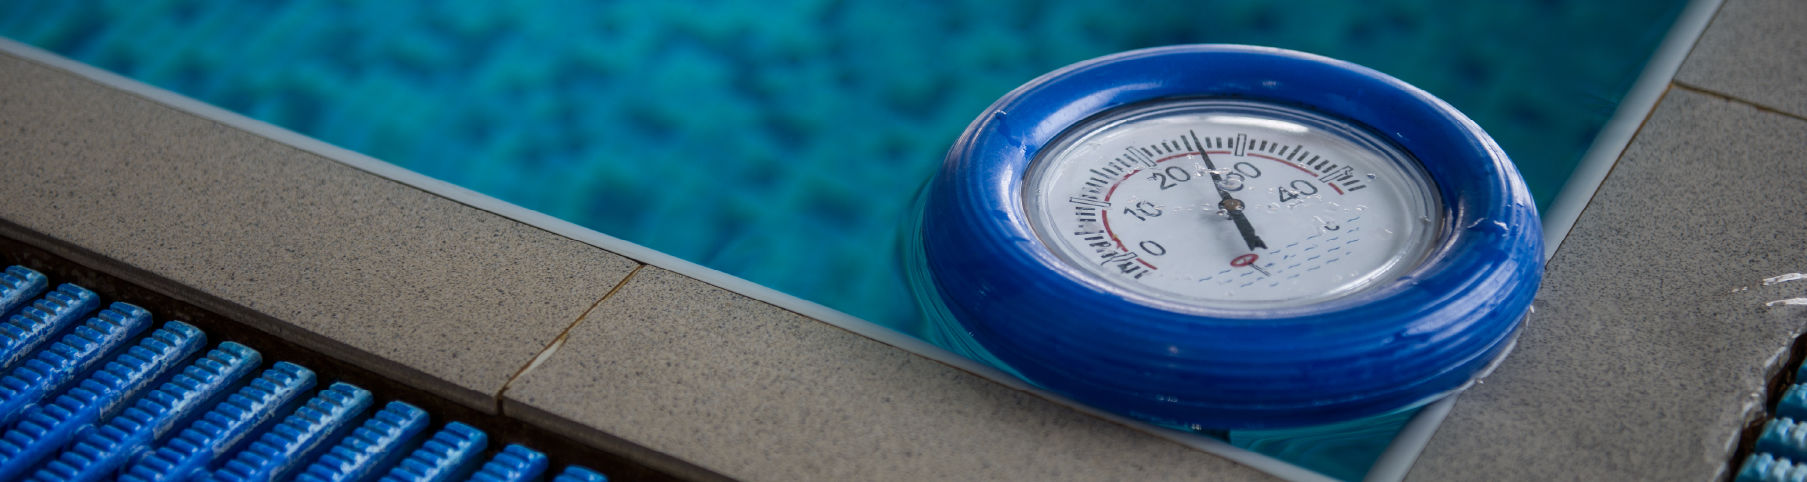 Pool Heating Thermostat